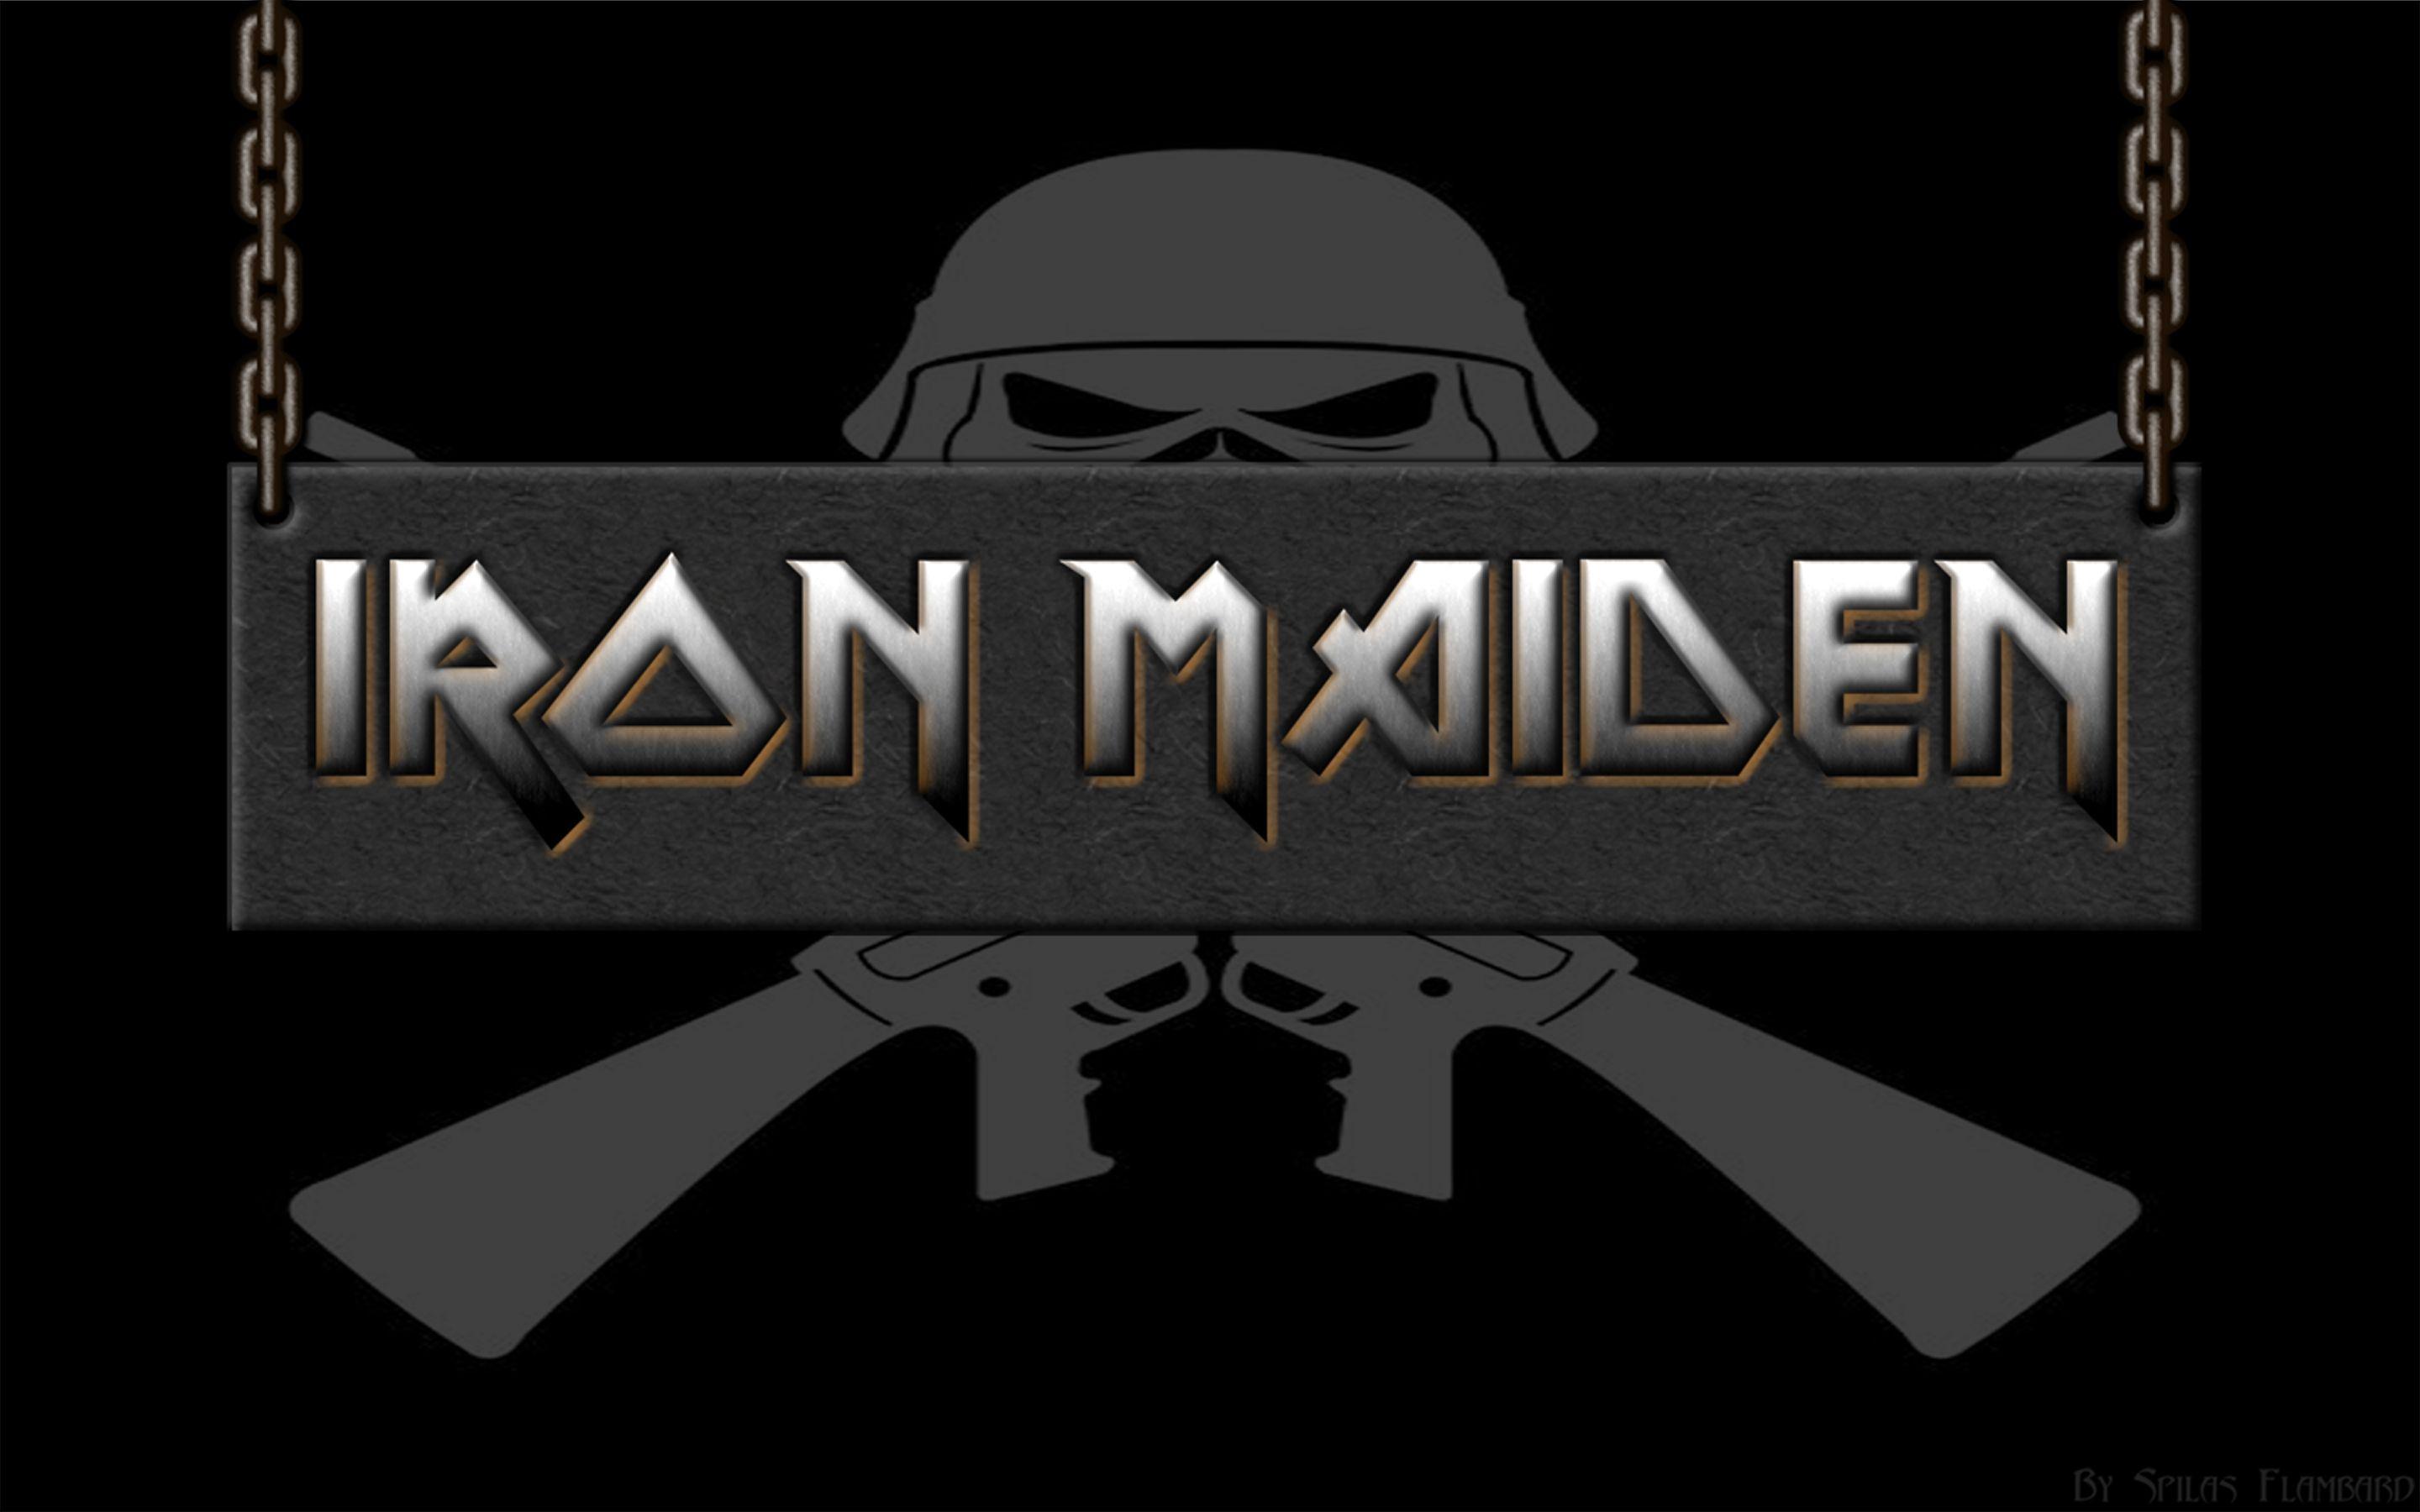 Iron Maiden wallpaper, picture, photo, image